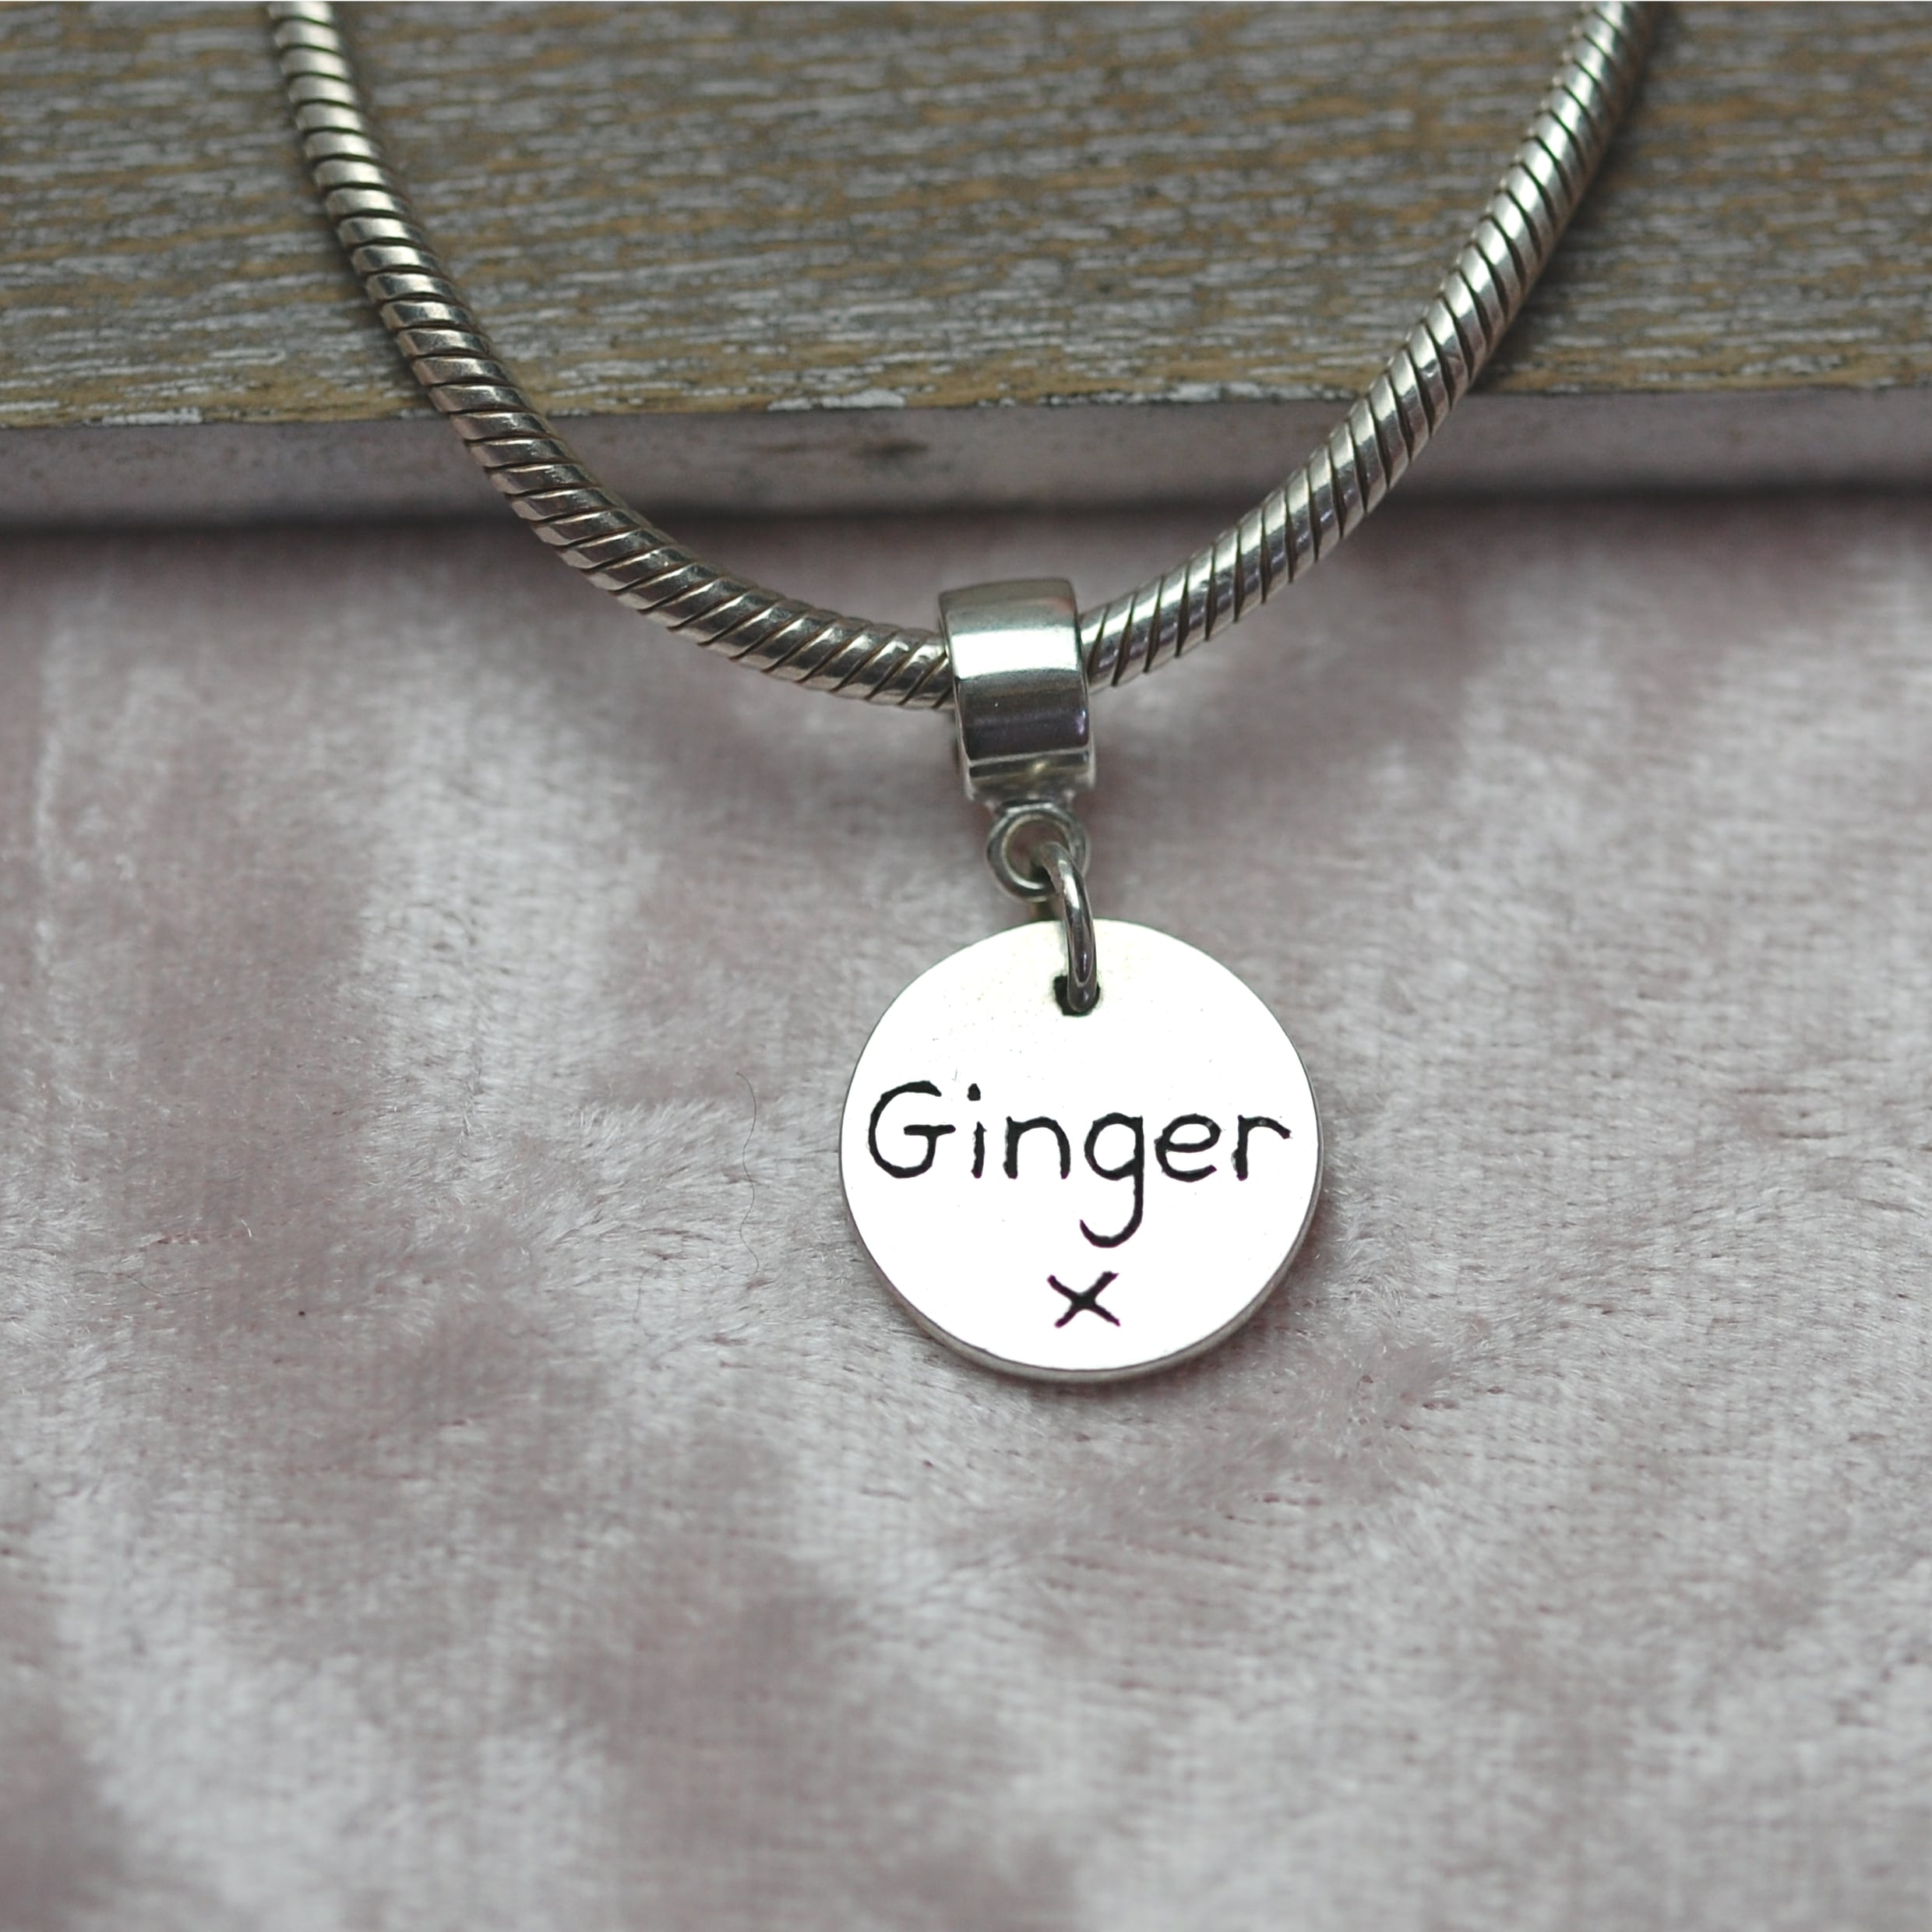 Inscription on the back of raised paw print charm with charm carrier